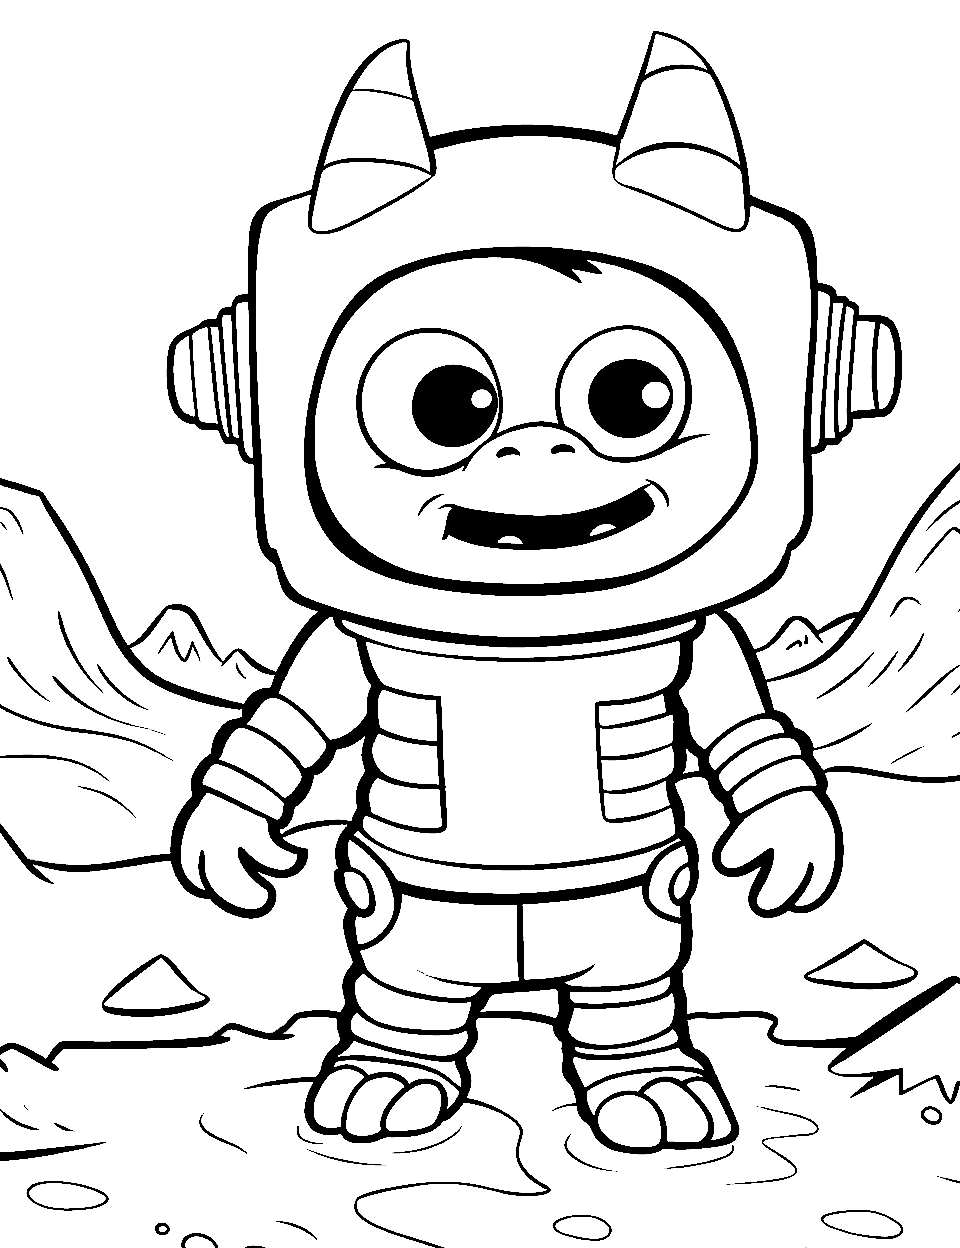 Monster in a Spacesuit Exploring Mars Coloring Page - A monster astronaut exploring the surface of Mars.